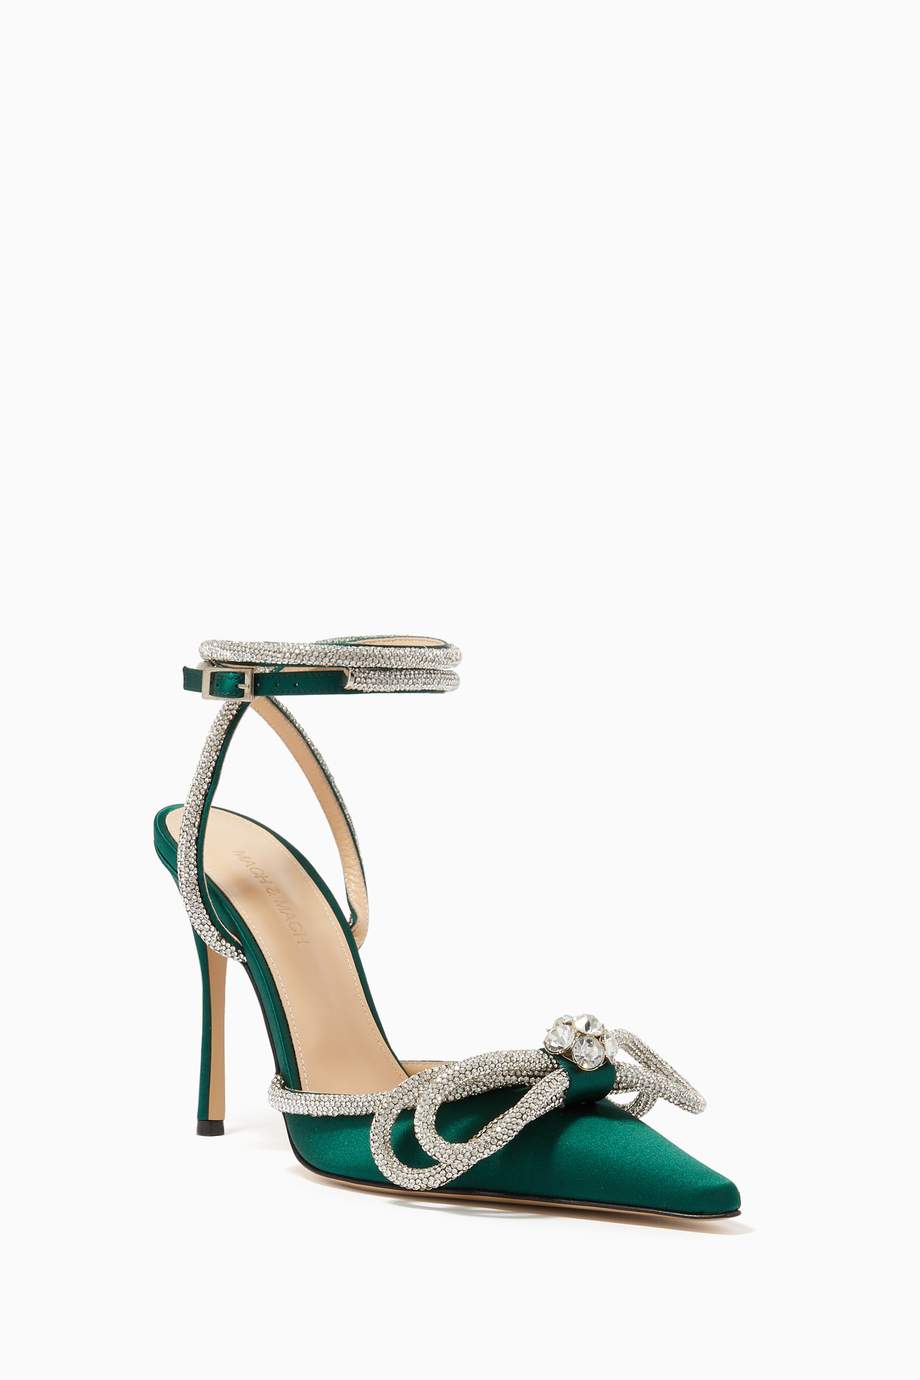 Shop Mach&Mach Green Double Crystal Bow Pumps in Silk Satin for Women ...